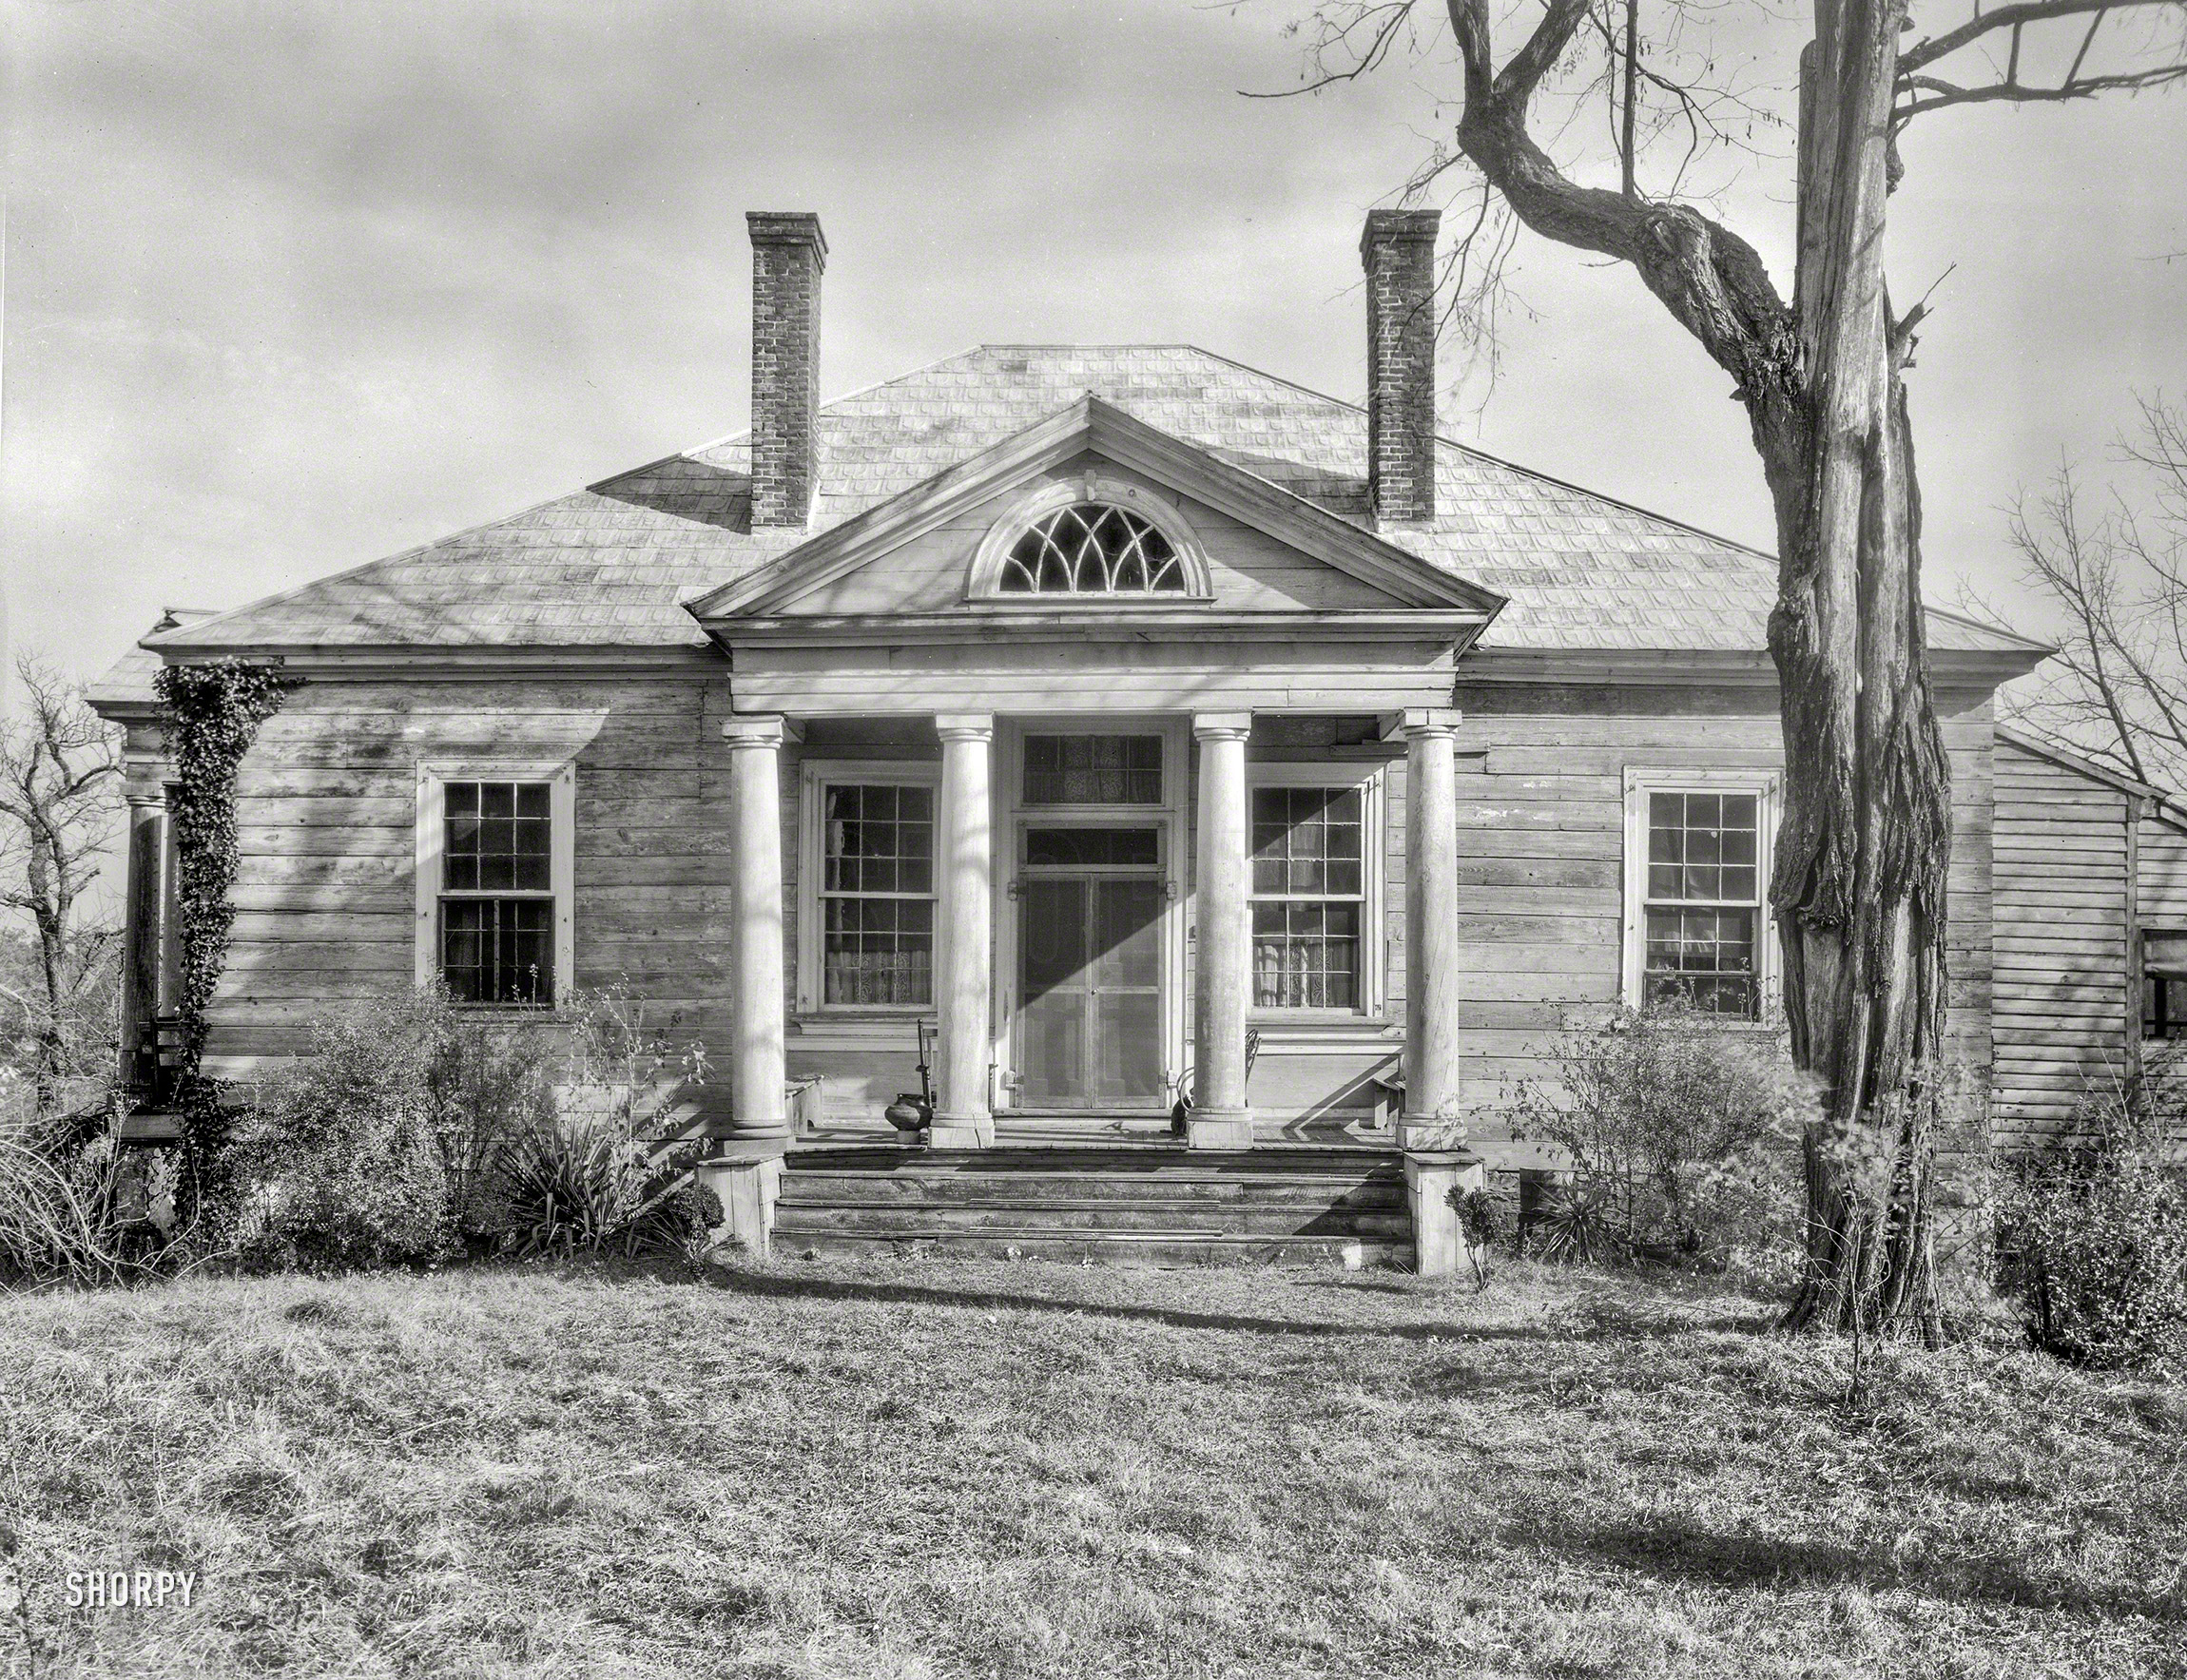 1935. "Edgemont, Keene vicinity, Albemarle County, Virginia. Structure dates to 1806. Was the home of Col. James Powell Cocke. Designed by Thomas Jefferson after the Villa Rotonda design of Palladio." 8x10 negative by Frances Benjamin Johnston, Carnegie Survey of the Architecture of the South. View full size.